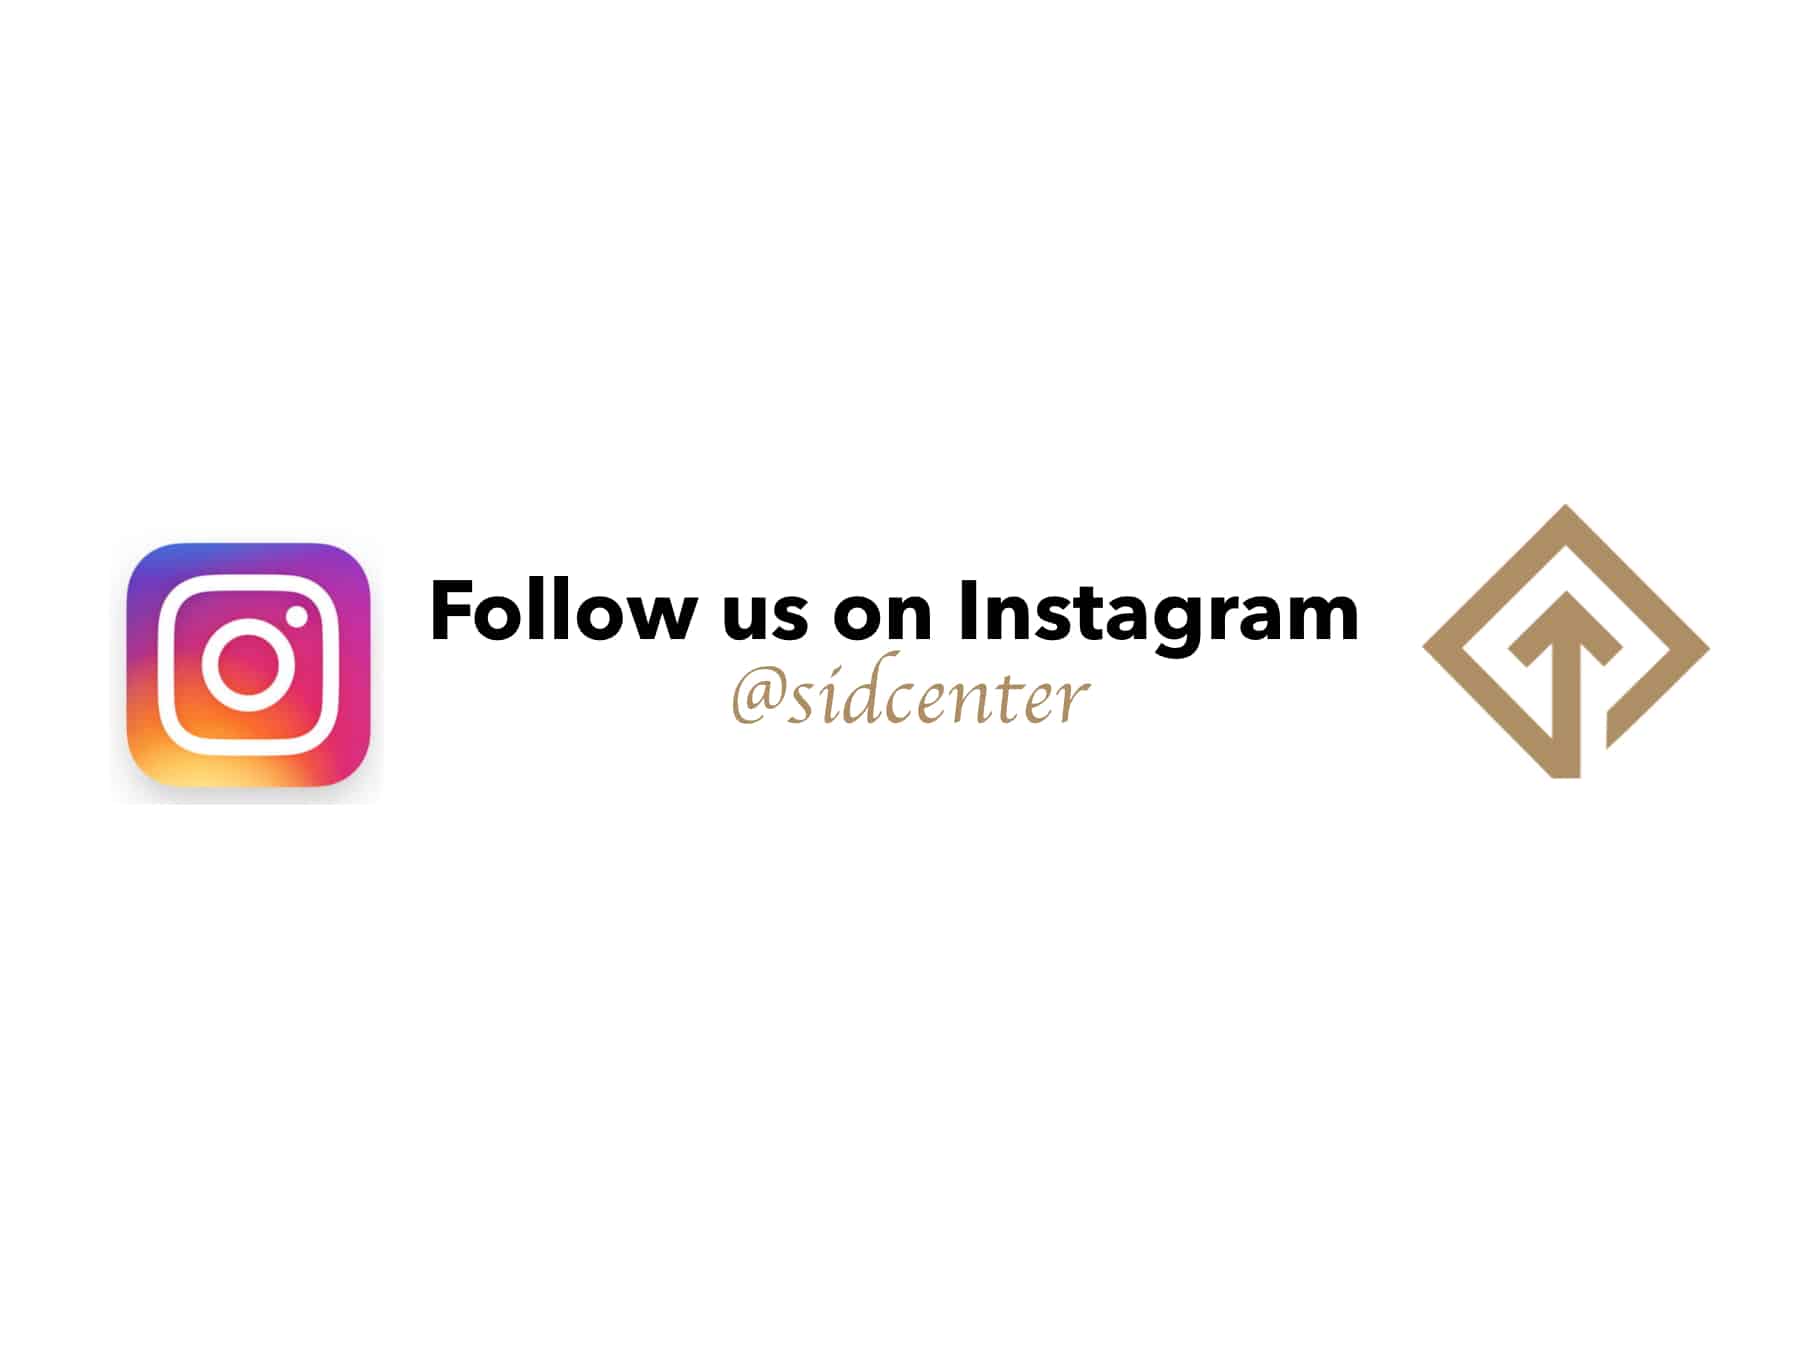 Invitation to connect: 'follow us on instagram @sidcenter' with instagram logo on the left and an arrow pointing right towards the handle.